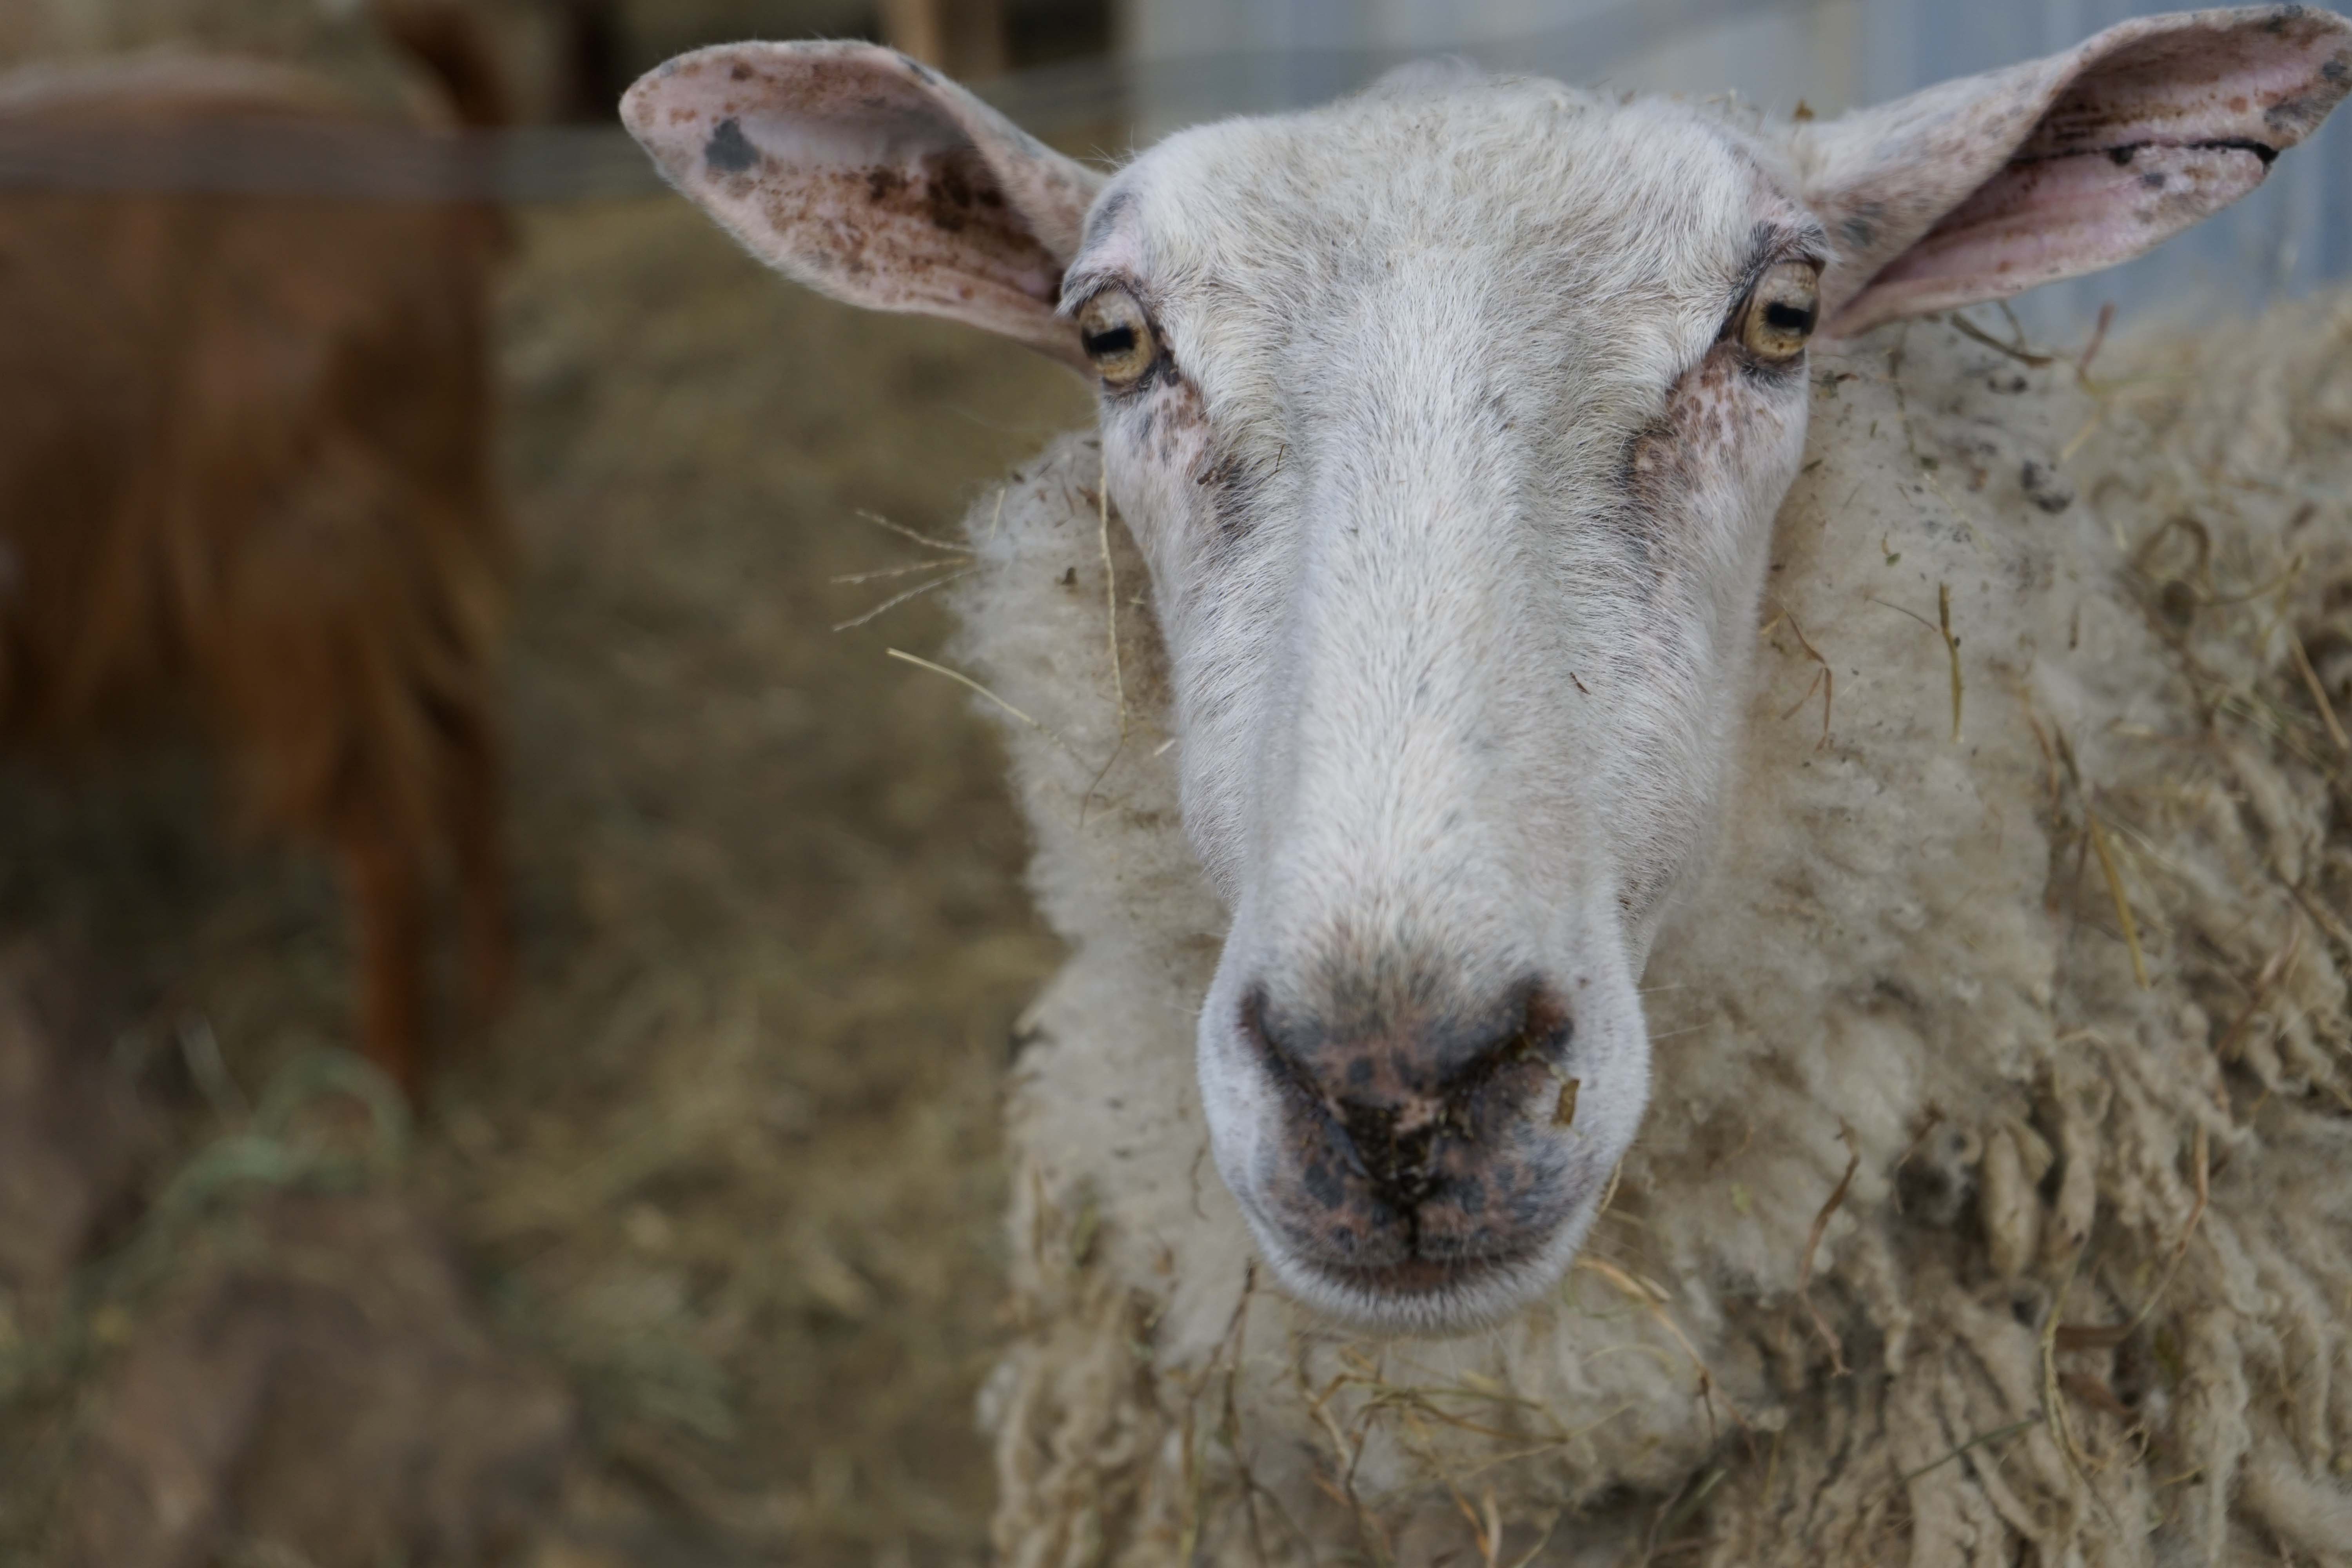 A sheep looks directly into the camera.